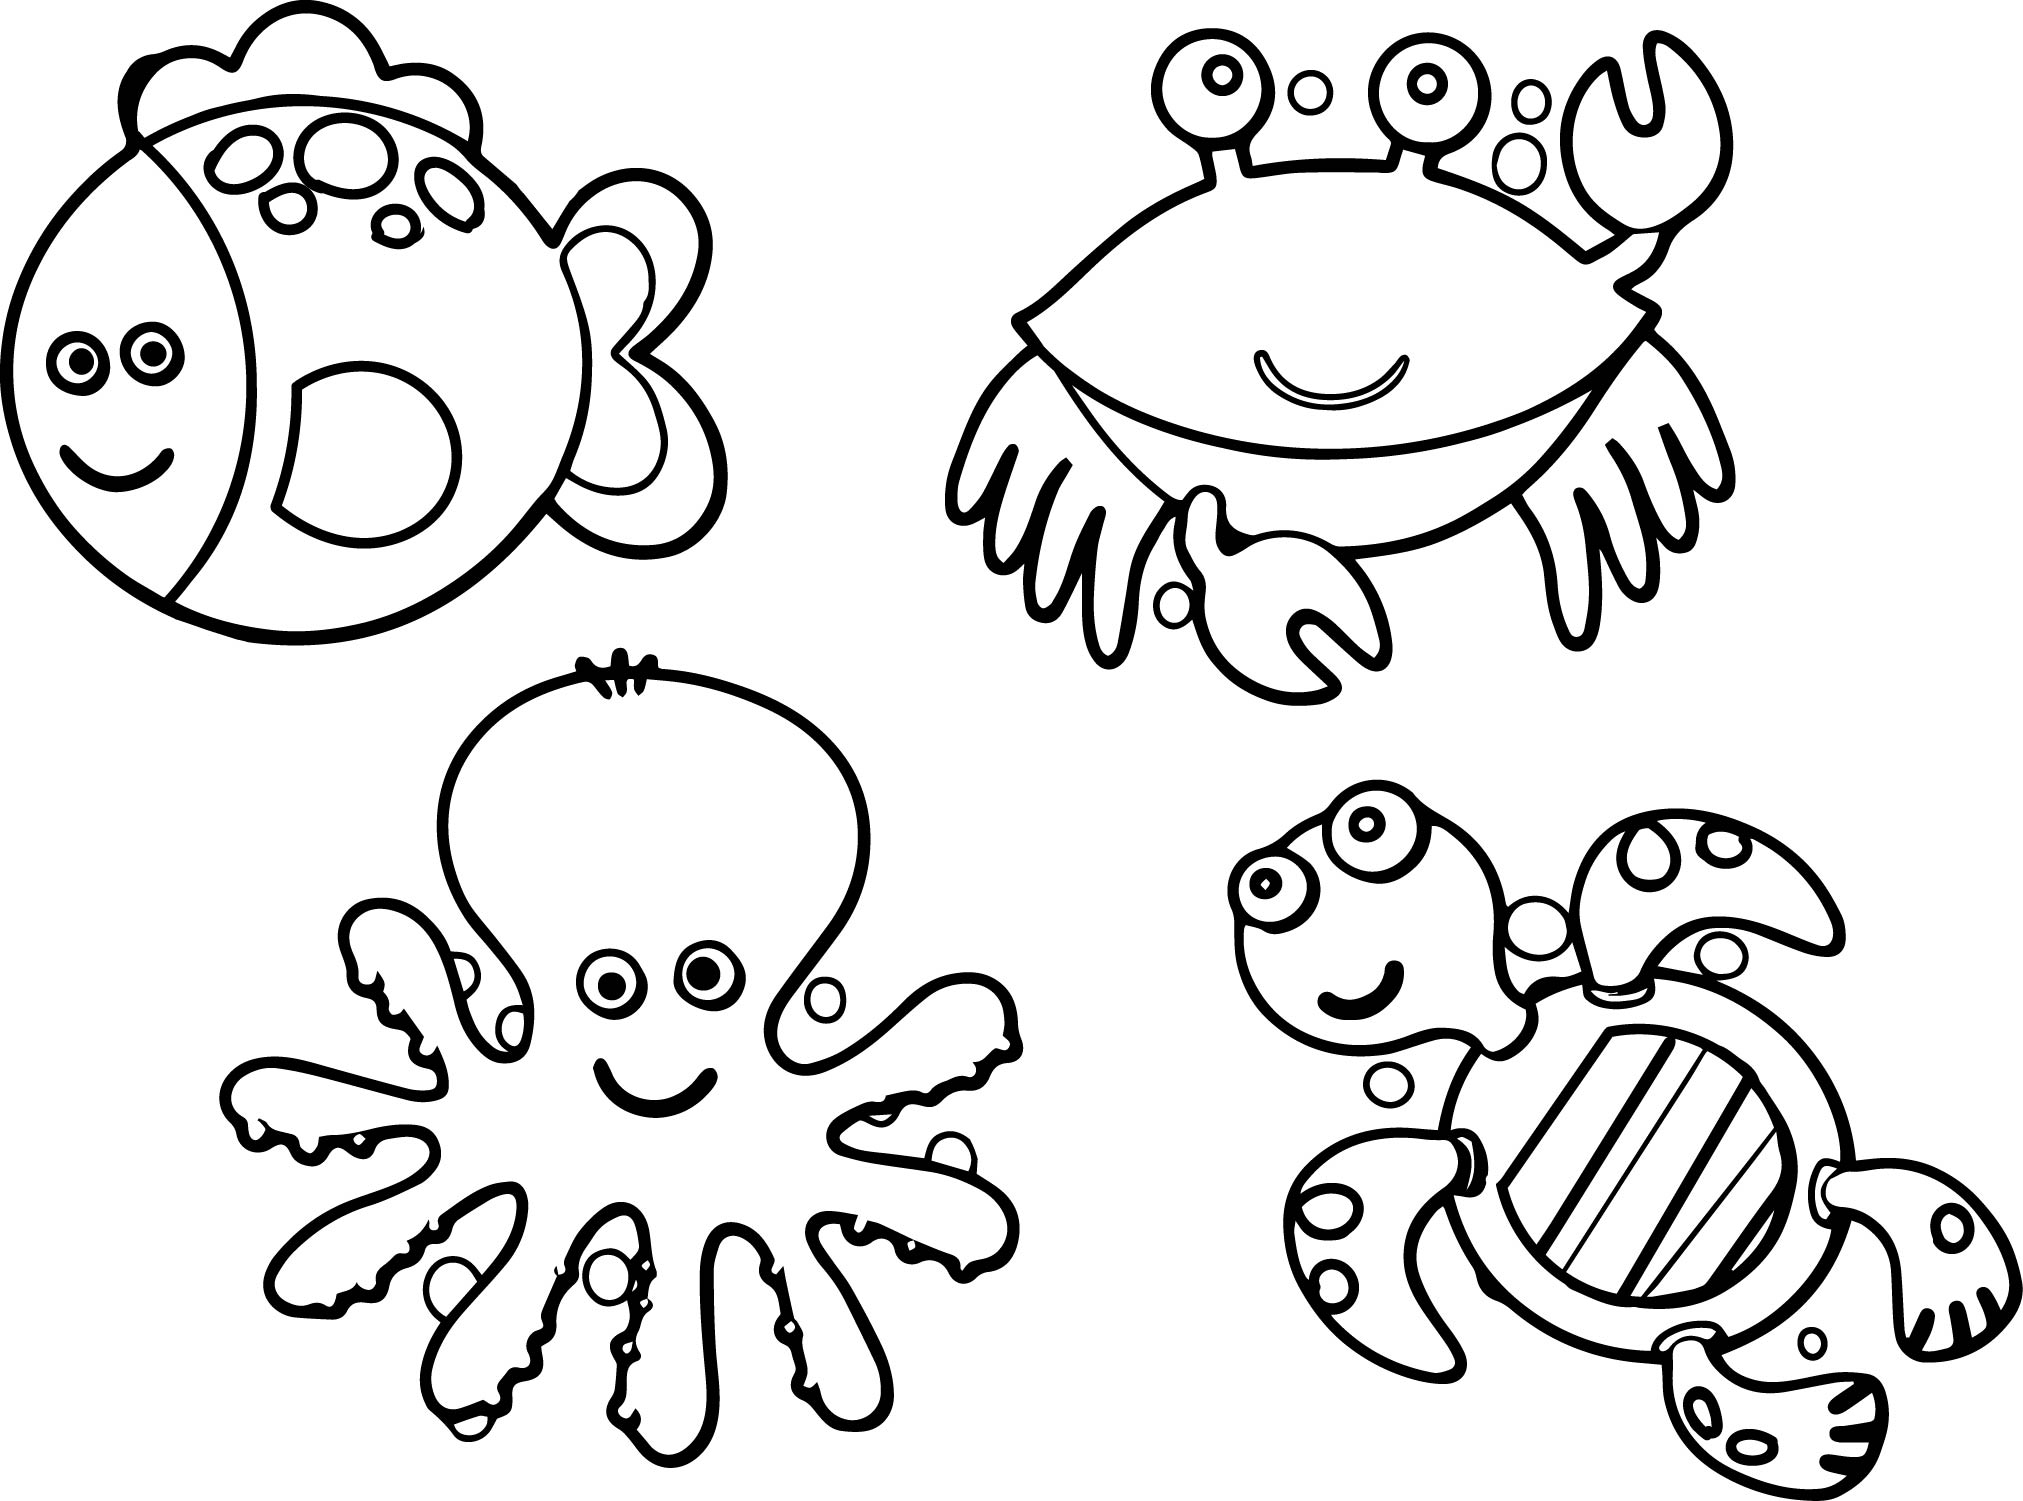 Sea Monster Coloring Pages at GetDrawings | Free download